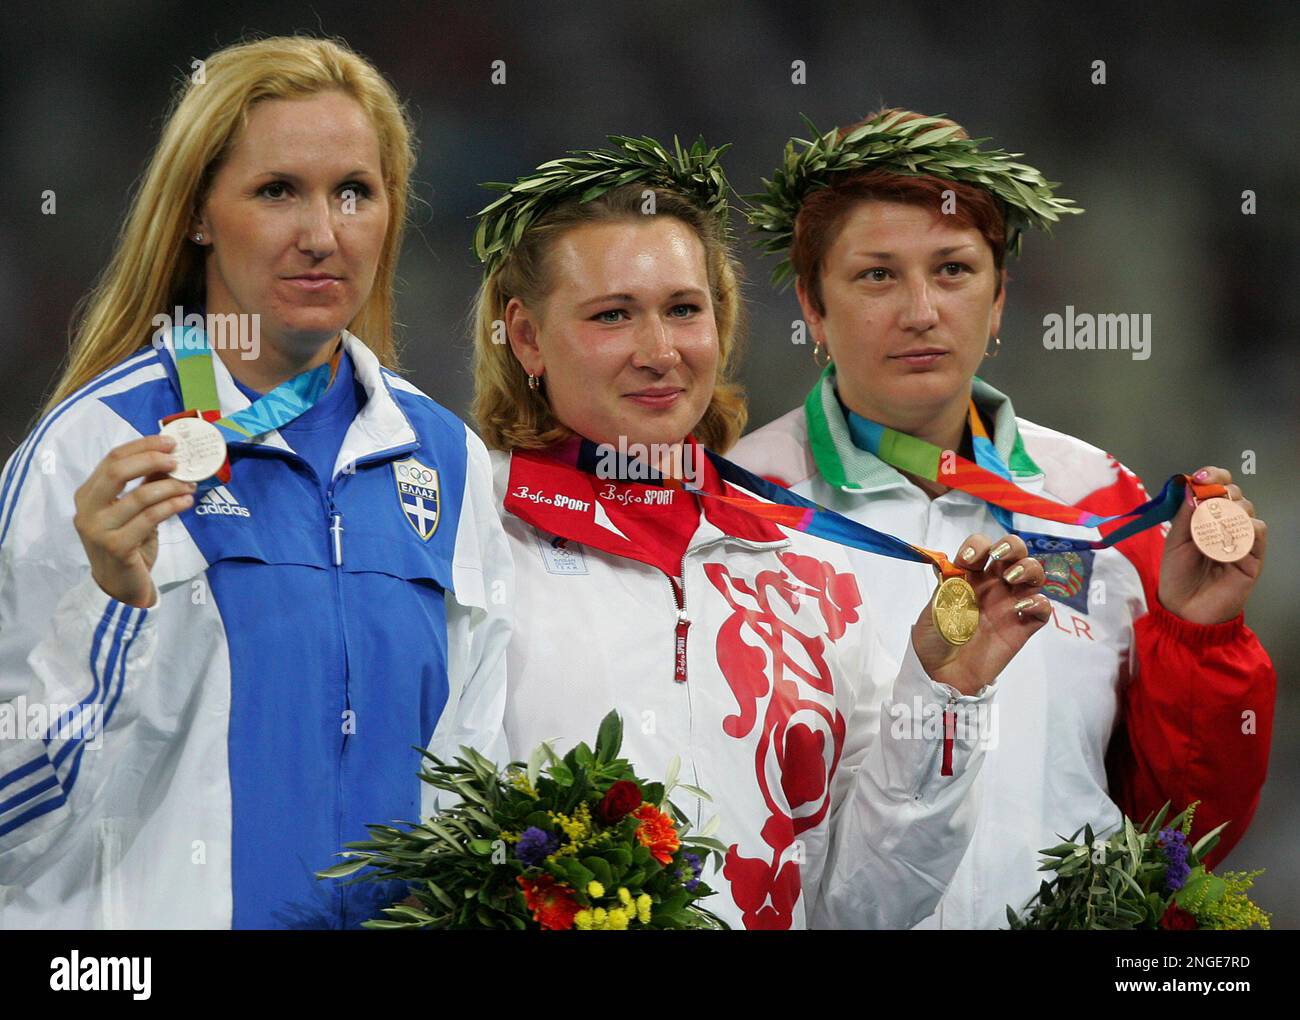 Natalya Sadova, center, of Russia, won the discus gold medal with a throw of 67.02 meters at the 2004 Olympic Games Sunday, Aug. 22, 2004 in Athens, Greece. Anastasia Kelesidou, left, of Greece, won the silver, and Irina Yatchenko of Belarus took the bronze. (AP Photo/David J. Phillip) Stockfoto